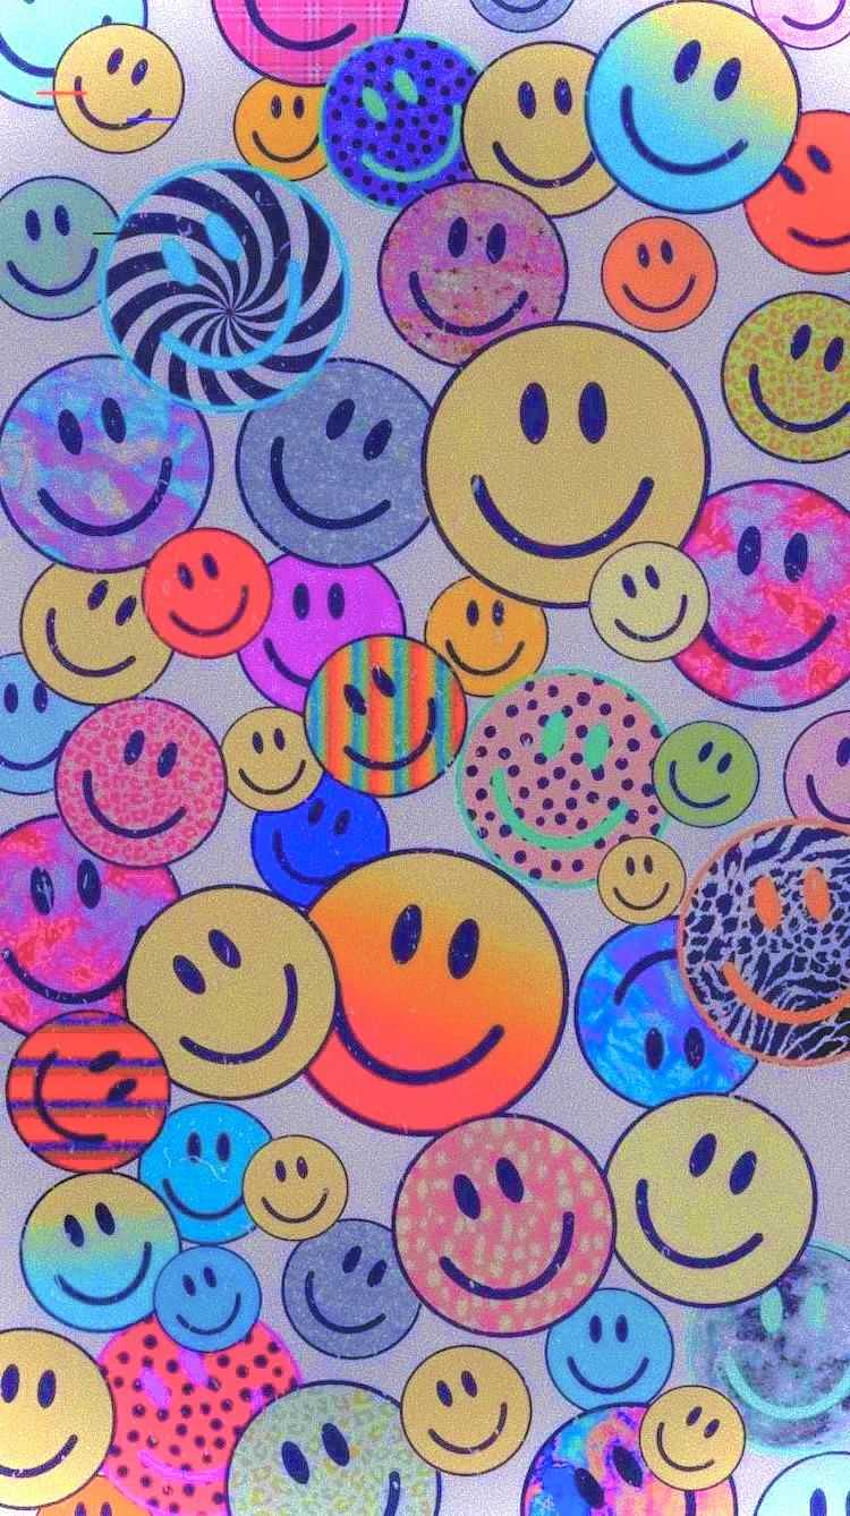 Download Brighten Someones Day With a Preppy Smiley Face  Wallpaperscom